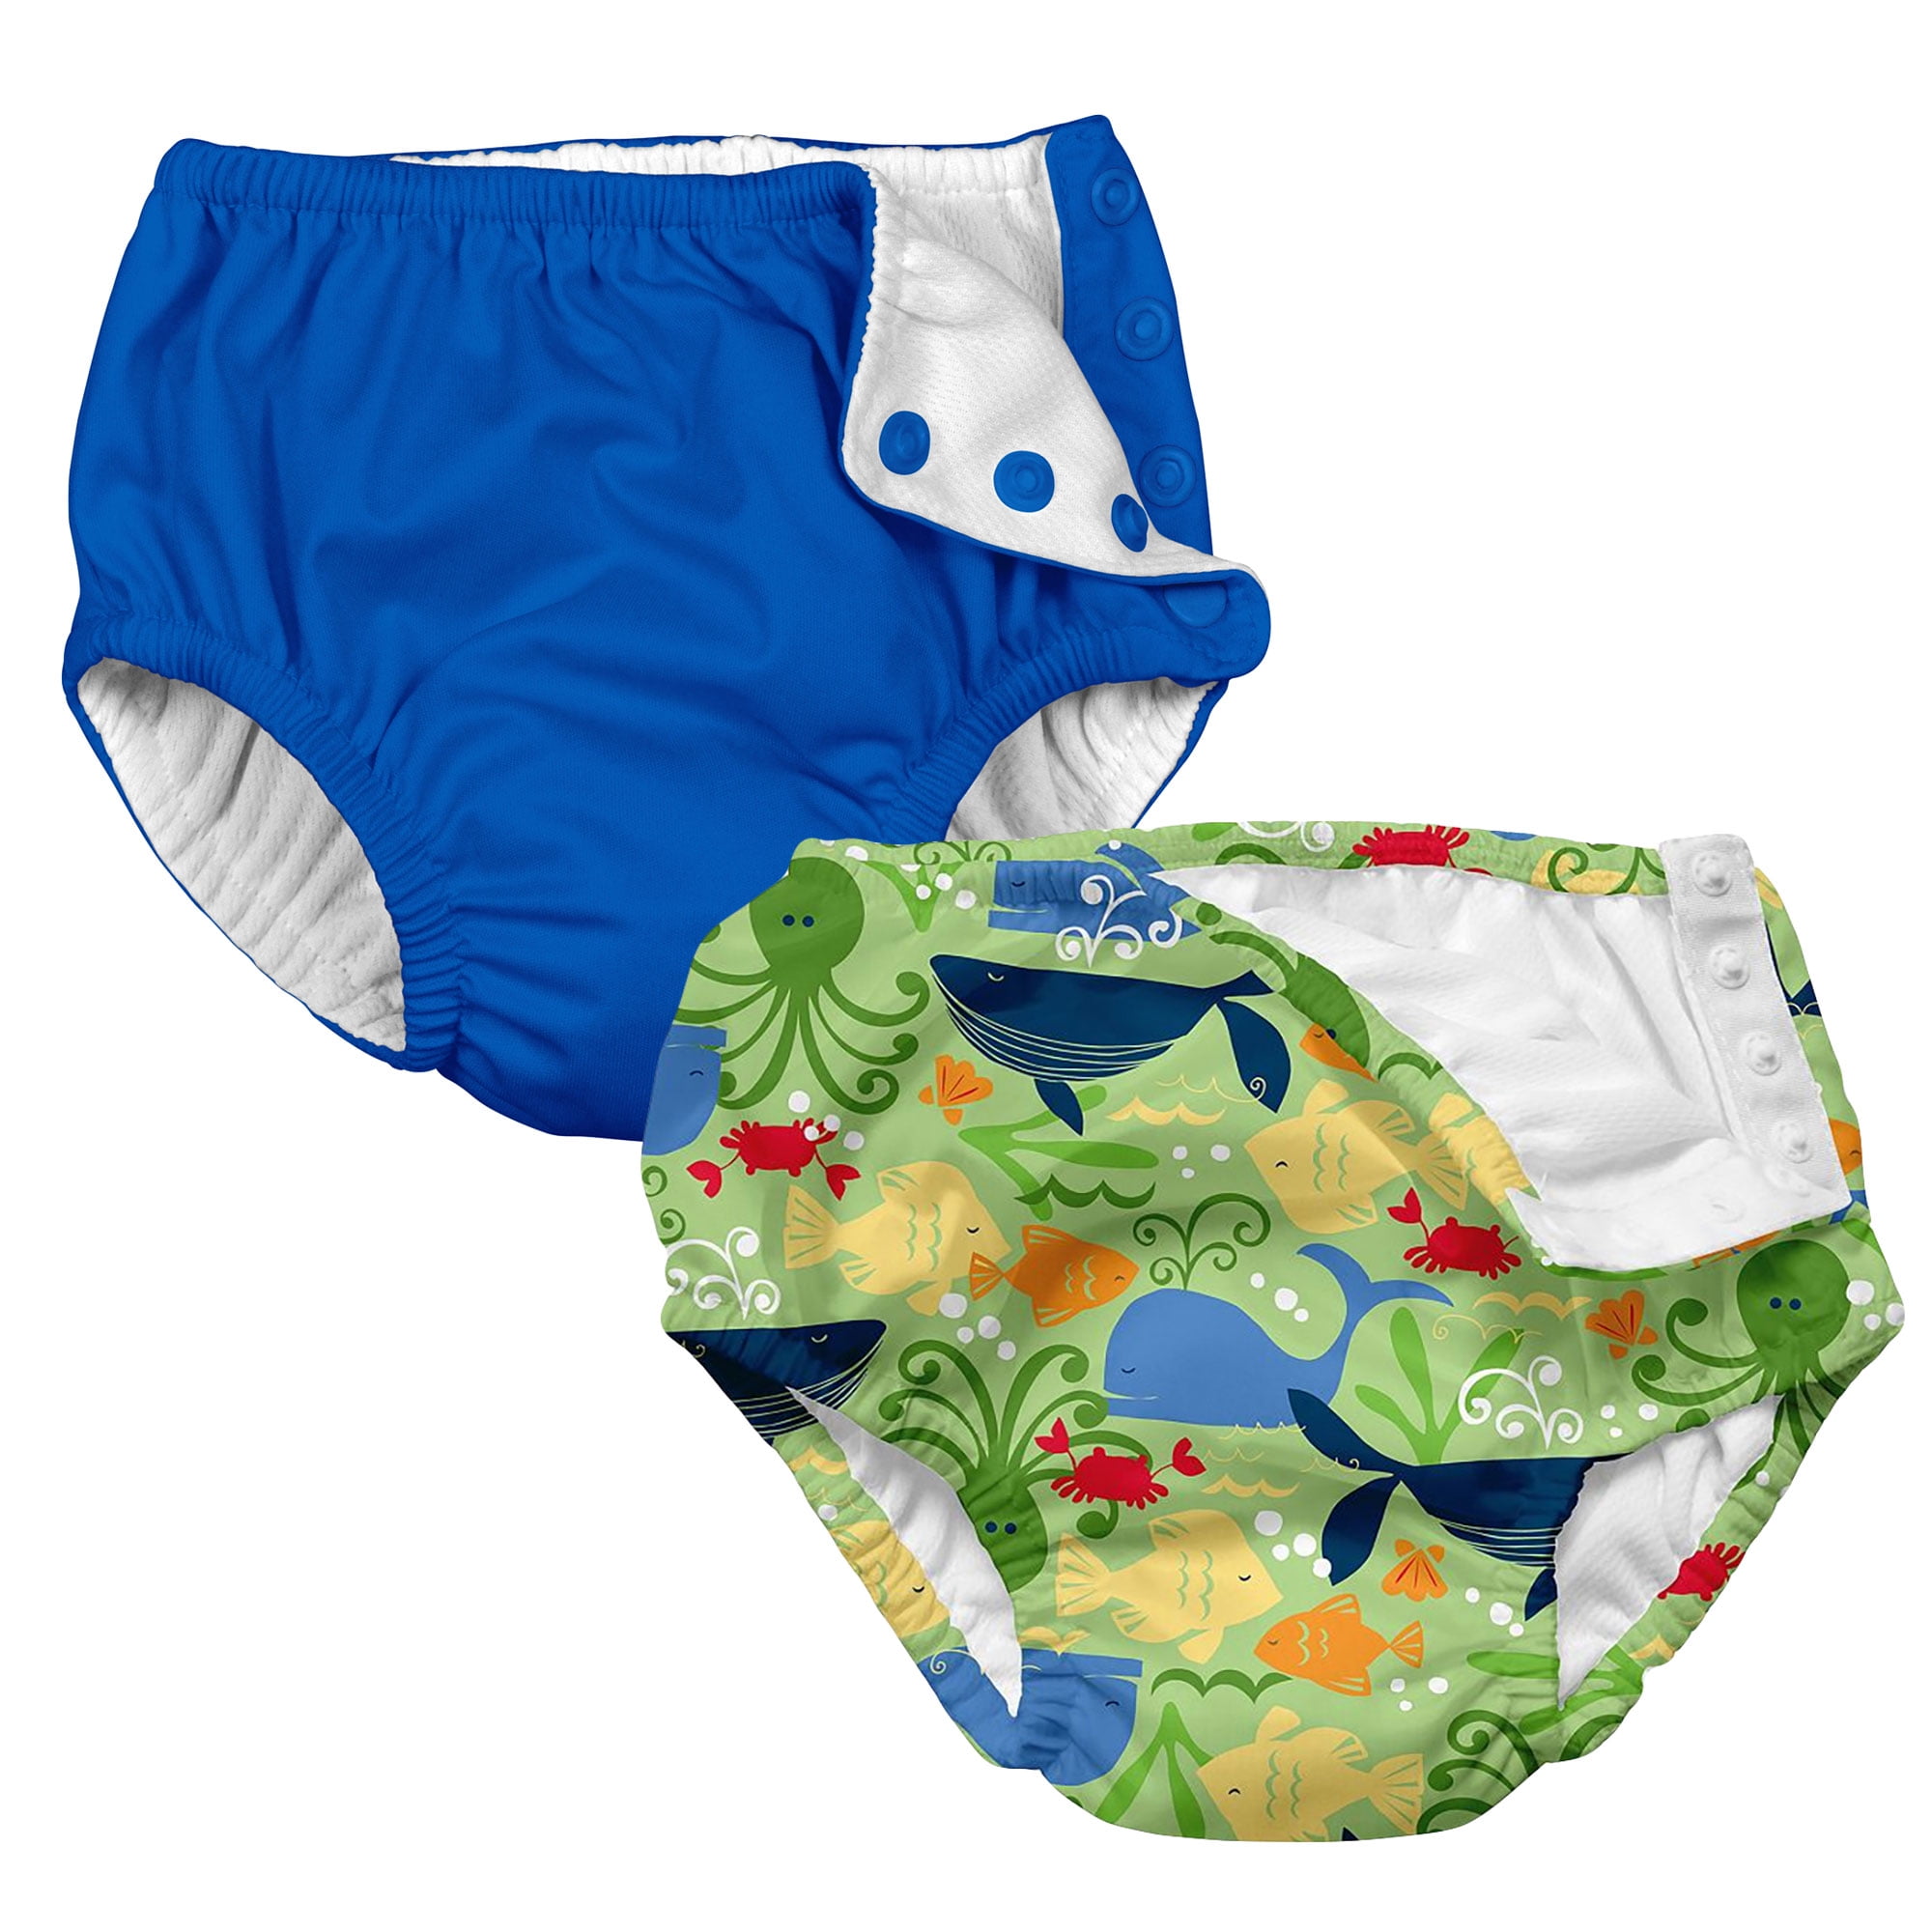 2PK Absorbent Boy Reusable Toddler Swim Diapers Sealife and Royal Blue 3T i Play 